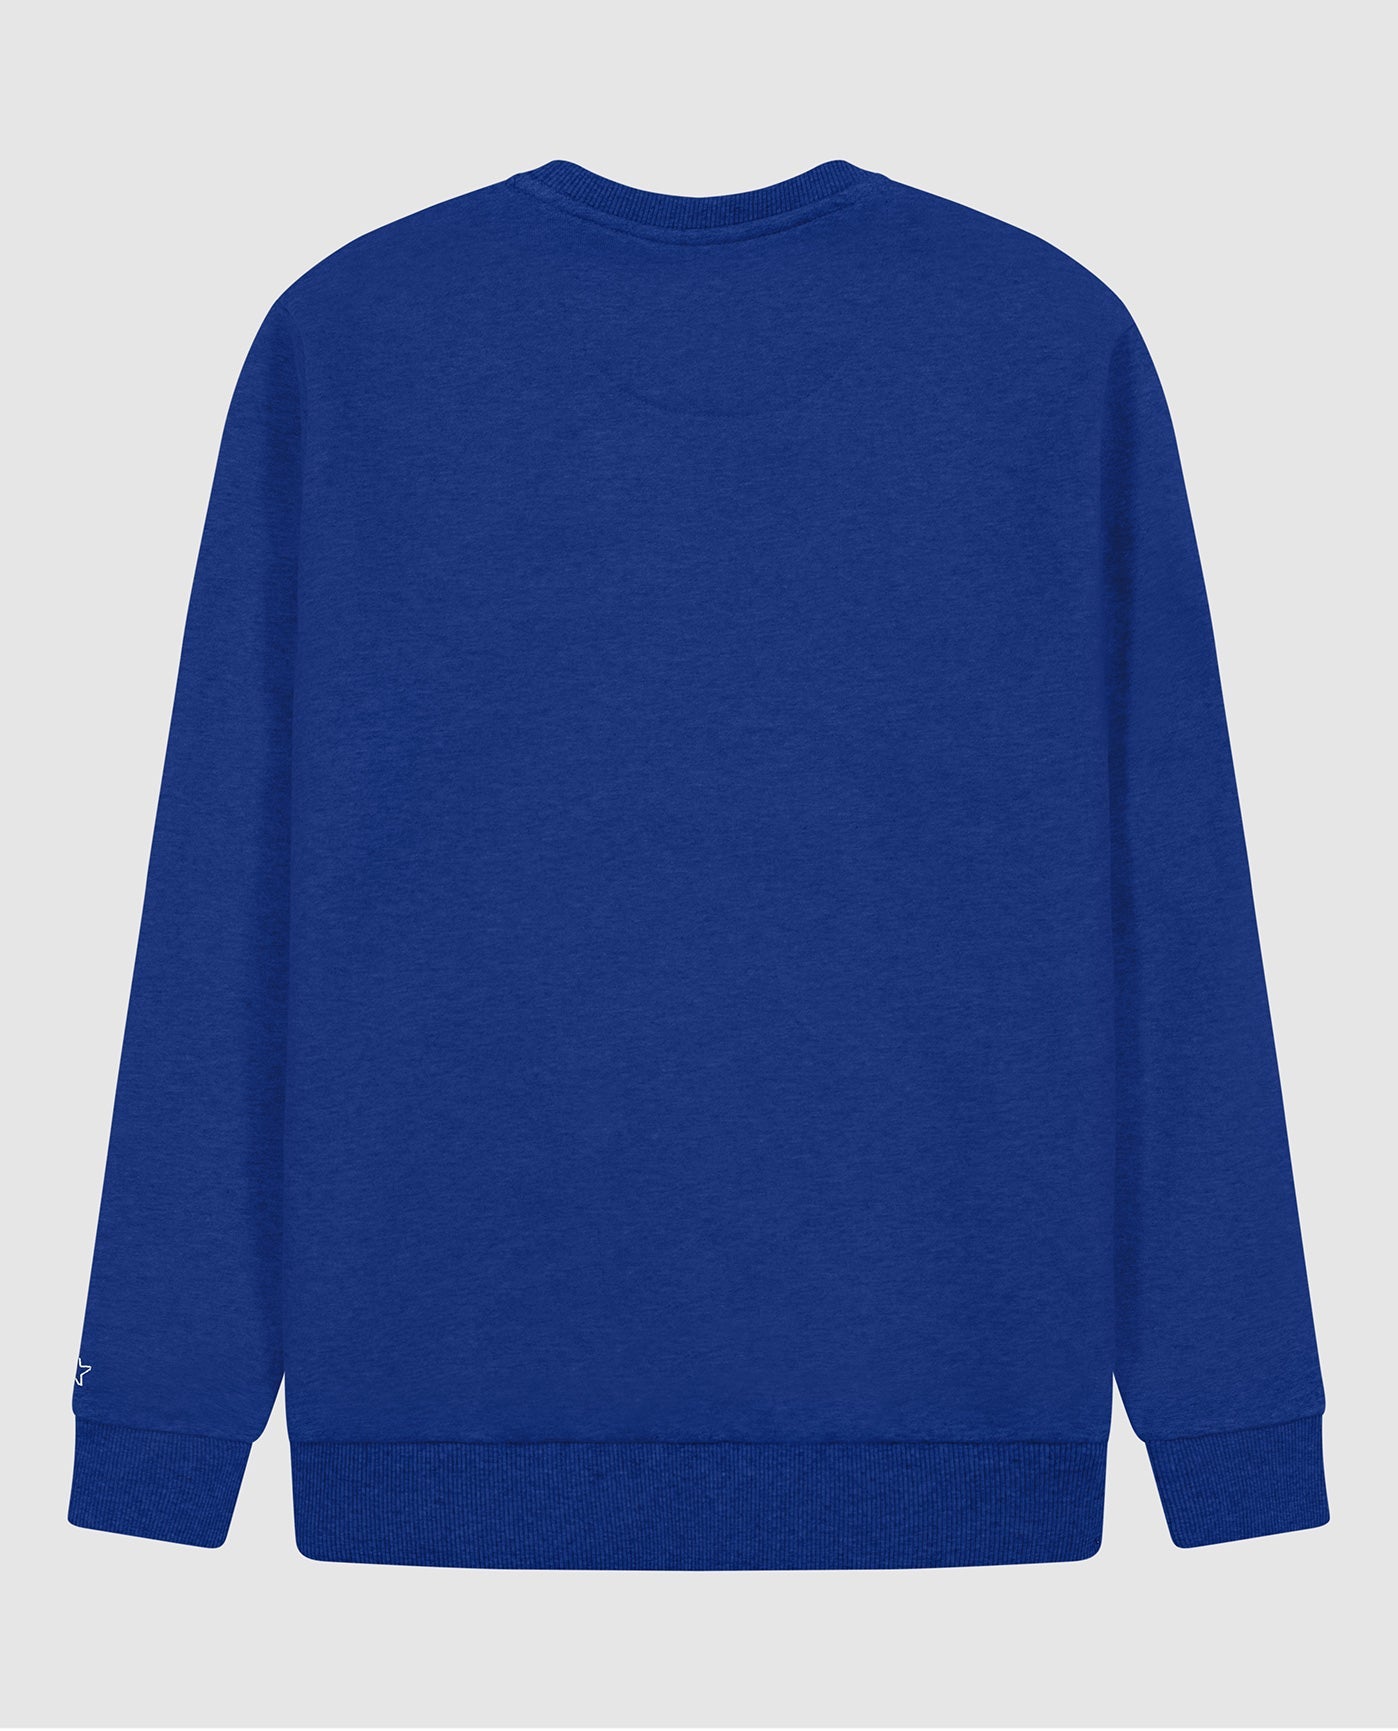 Back of New York Giants Jacquard Pullover Sweater | Giants Blue